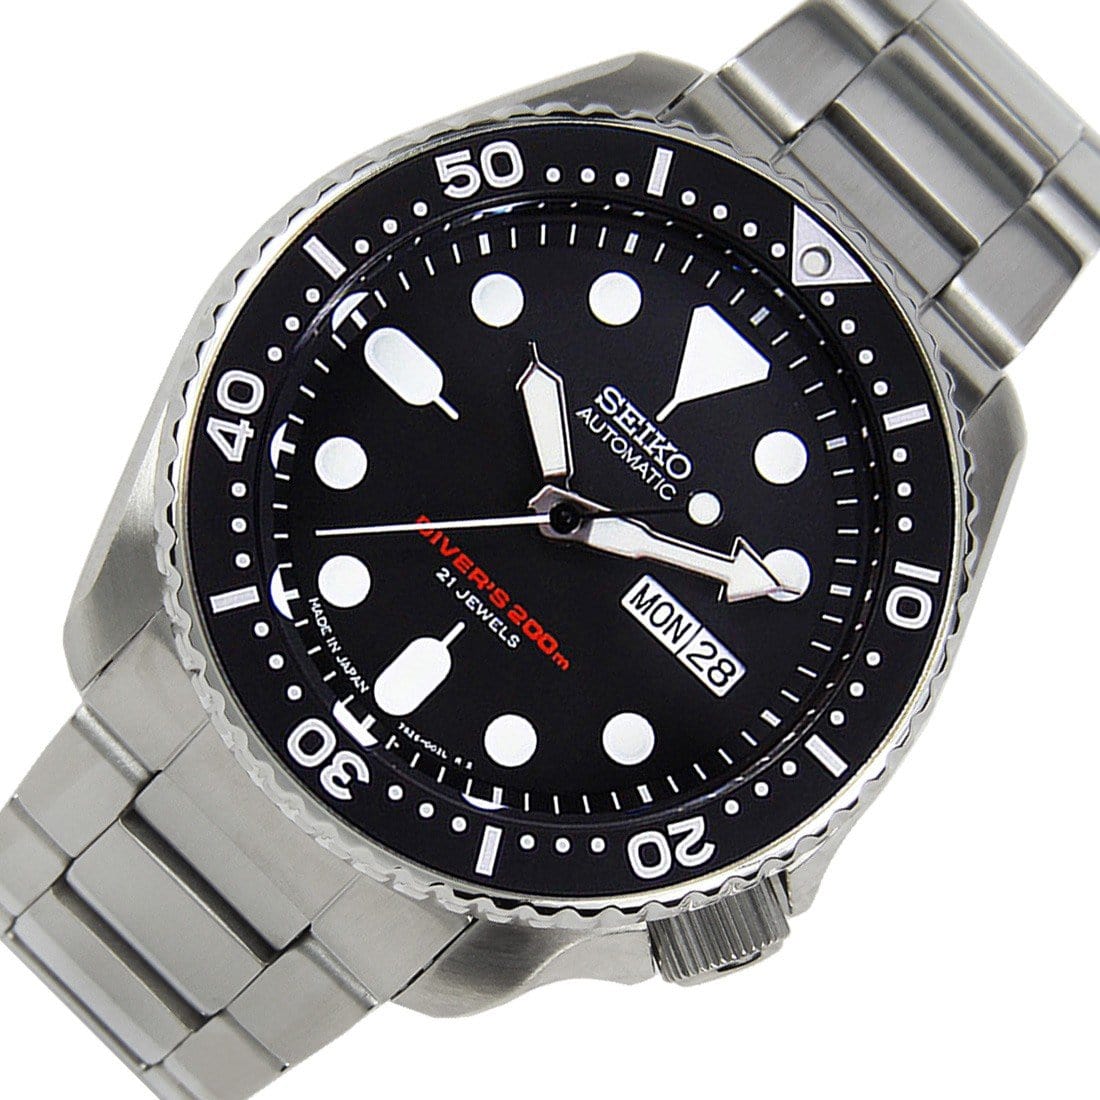 Seiko Japan Automatic Solid Oyster Watch SKX007 SKX007J1